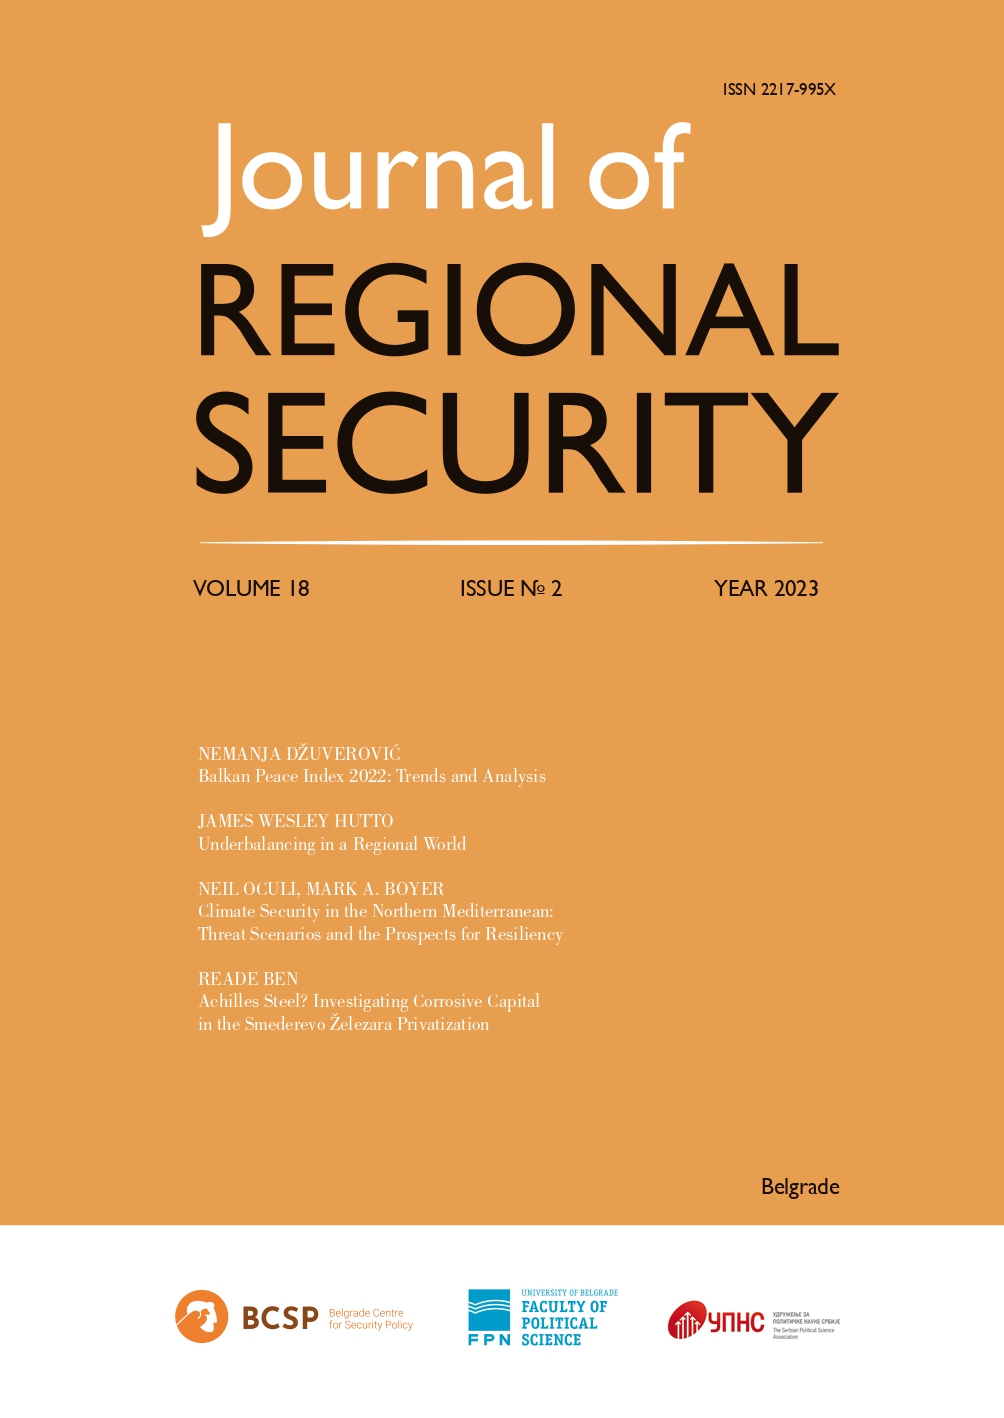 Climate Security in the Northern Mediterranean: Threat Scenarios and the Prospects for Resiliency